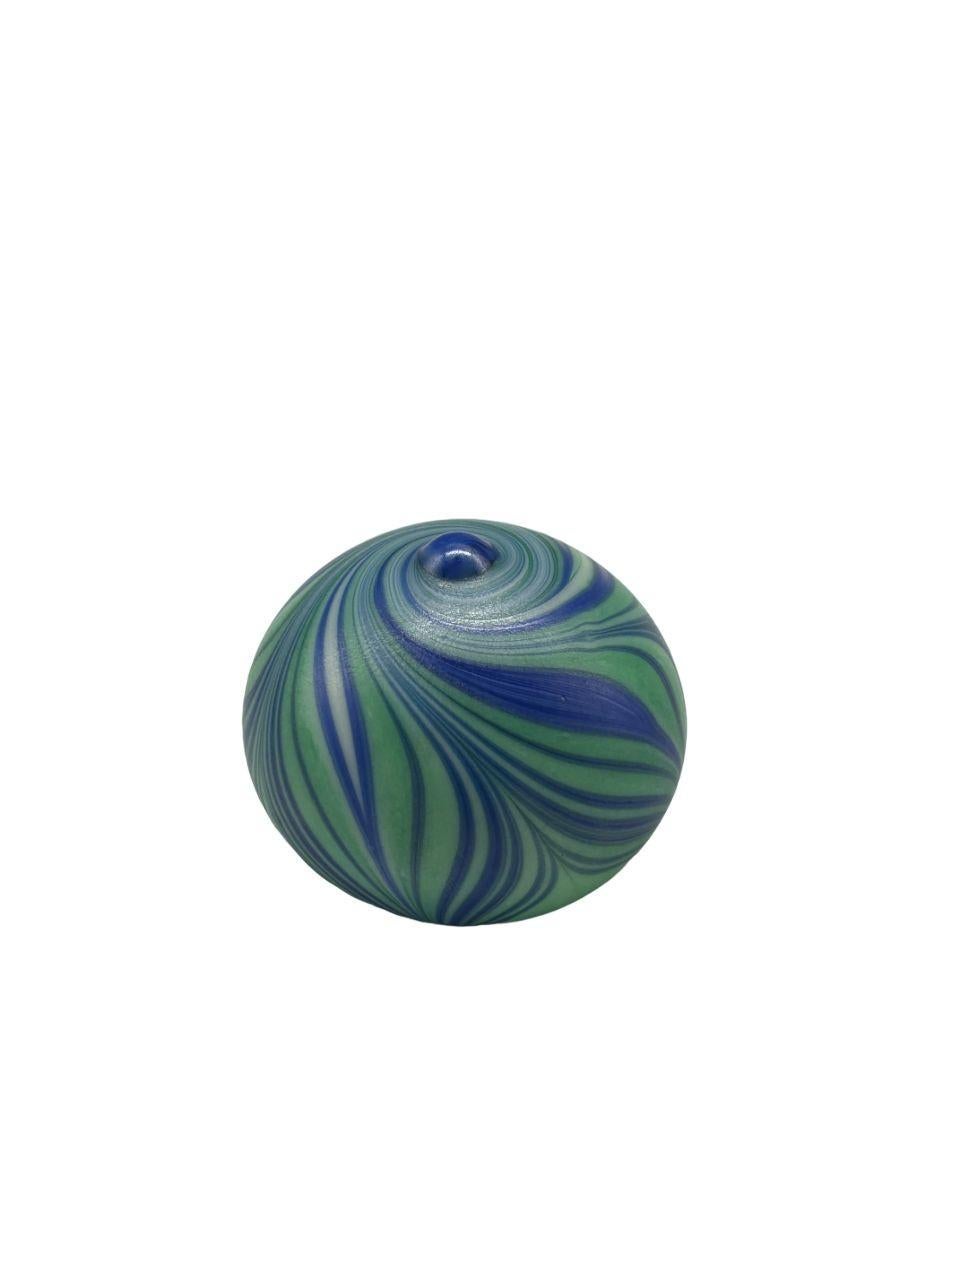 American Rare Vintage Signed 1975 John Barber Studio Art Glass Swirl Paperweight Weight For Sale